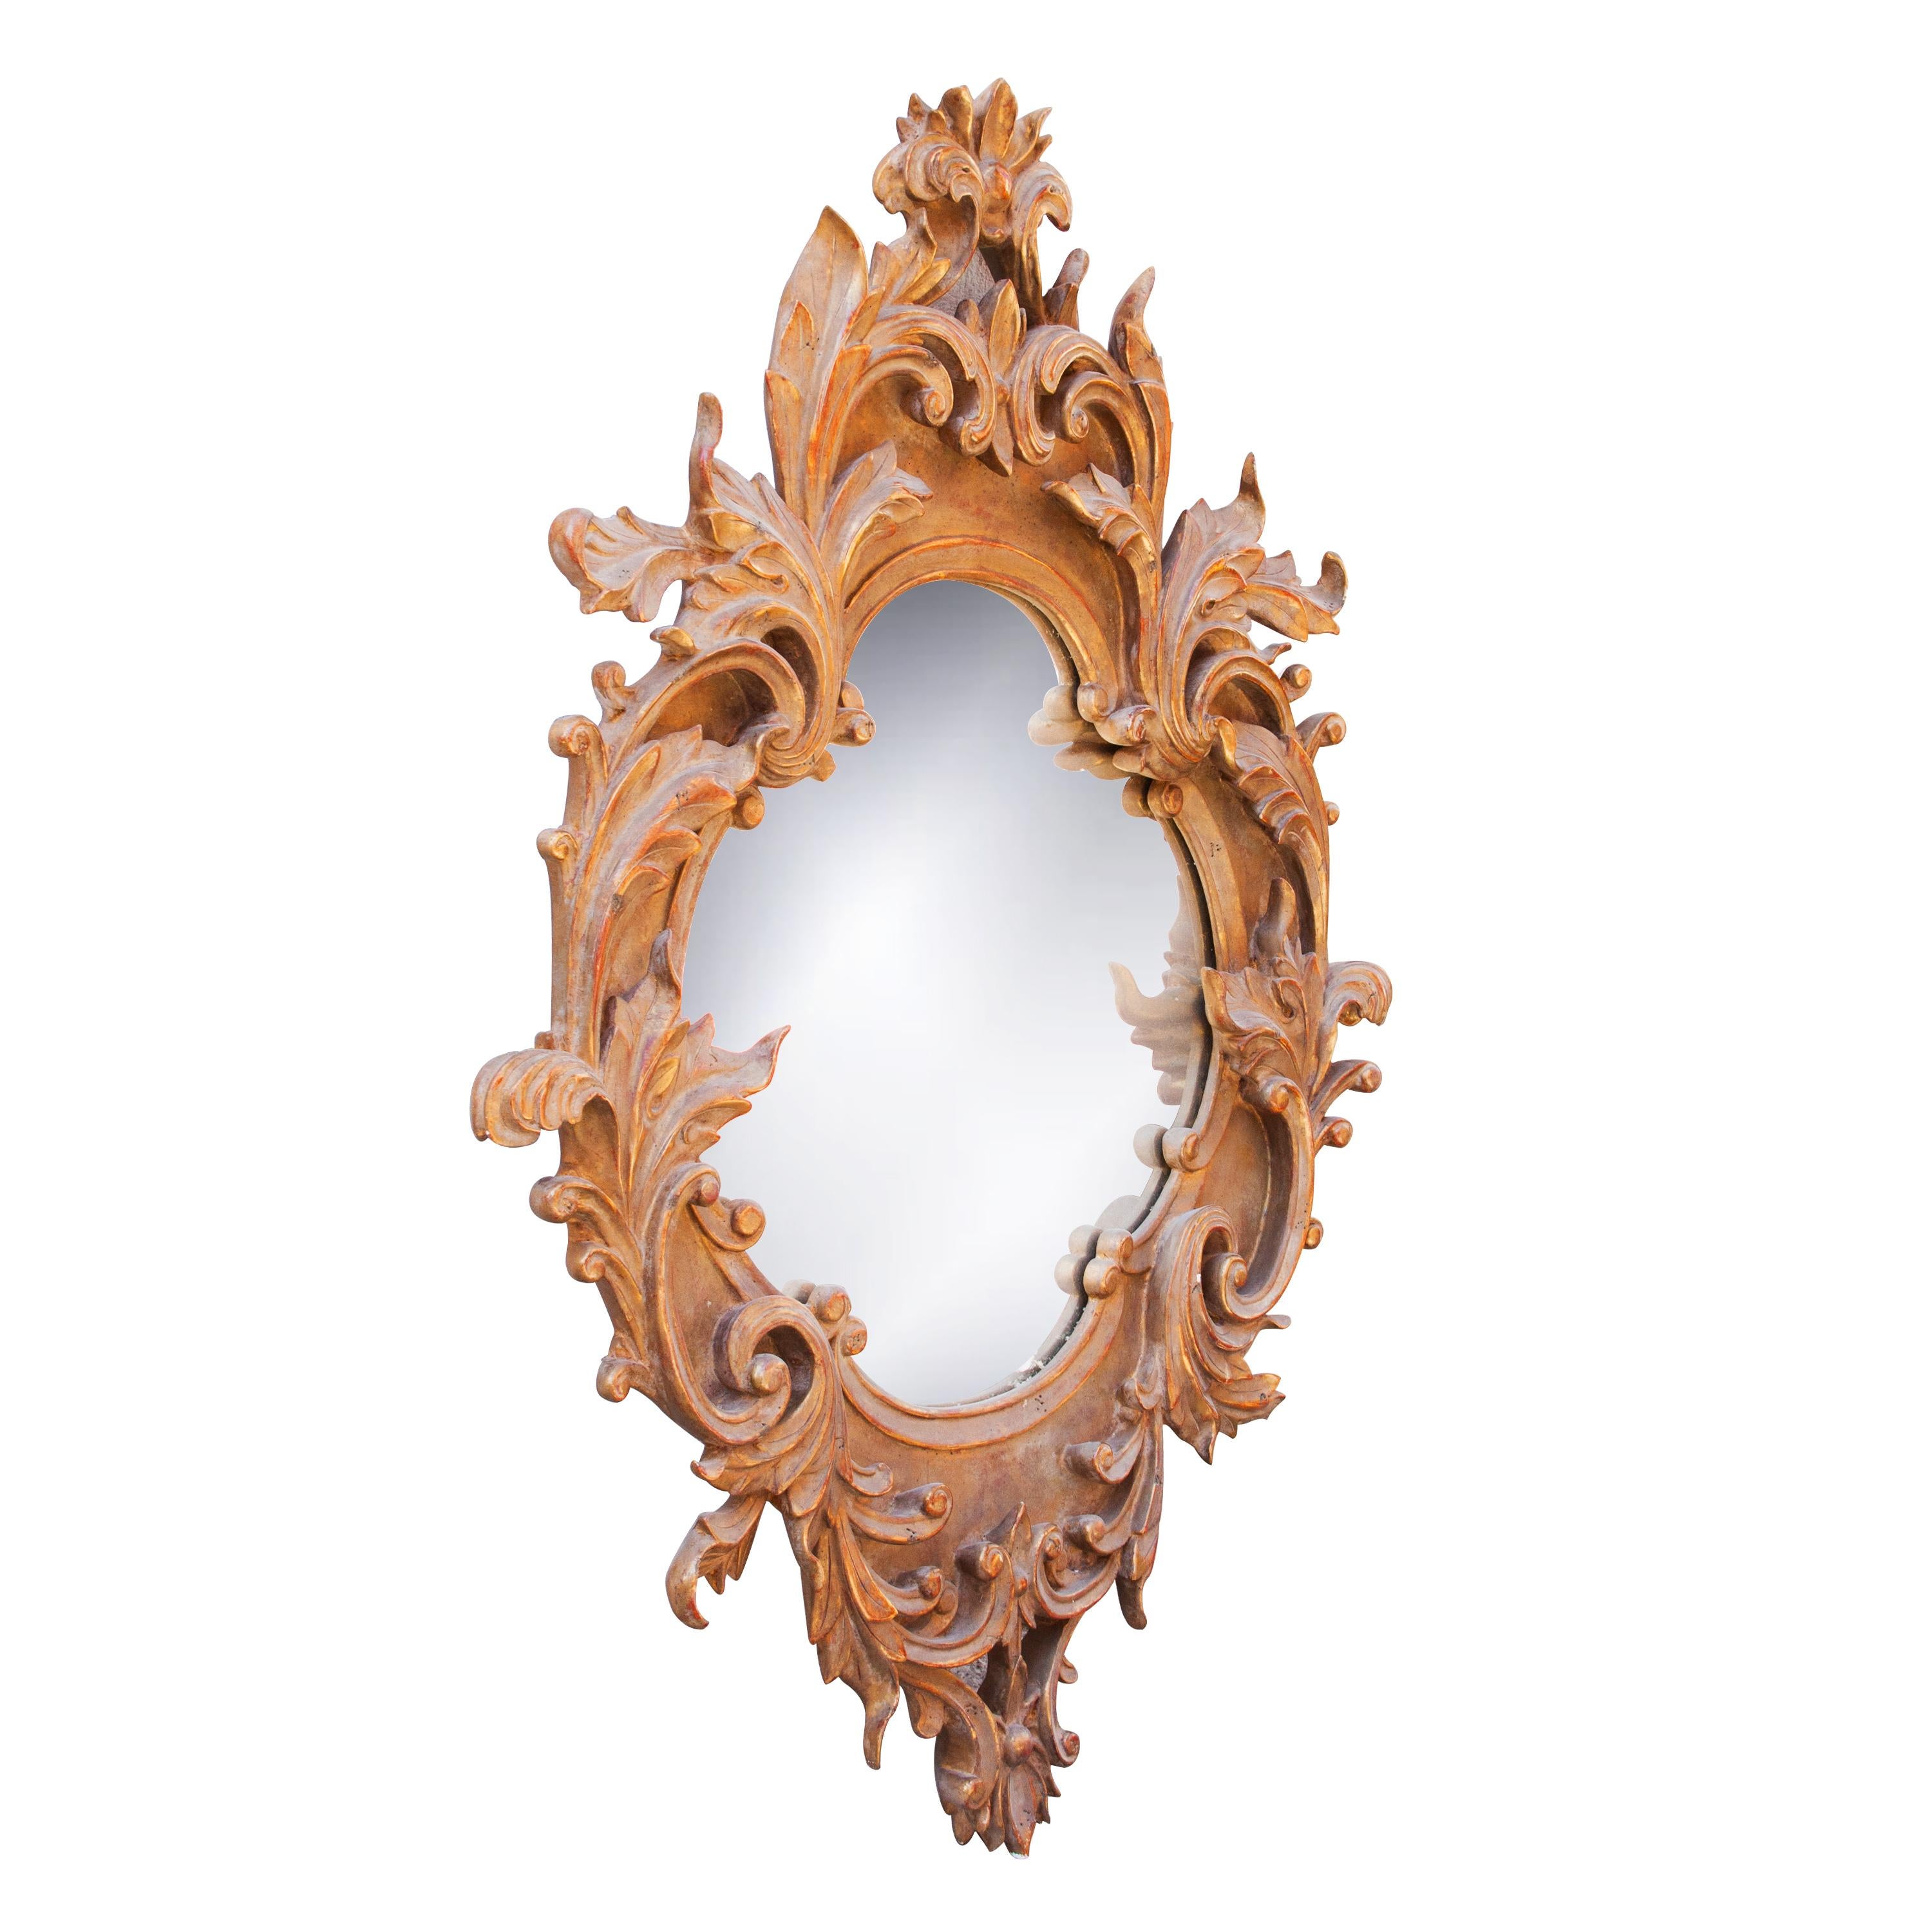 Neoclassical baroque style handcrafted mirror. Acanthus leaf shaped. Hand carved wooden structure with gold foil finished, Spain, 1970.